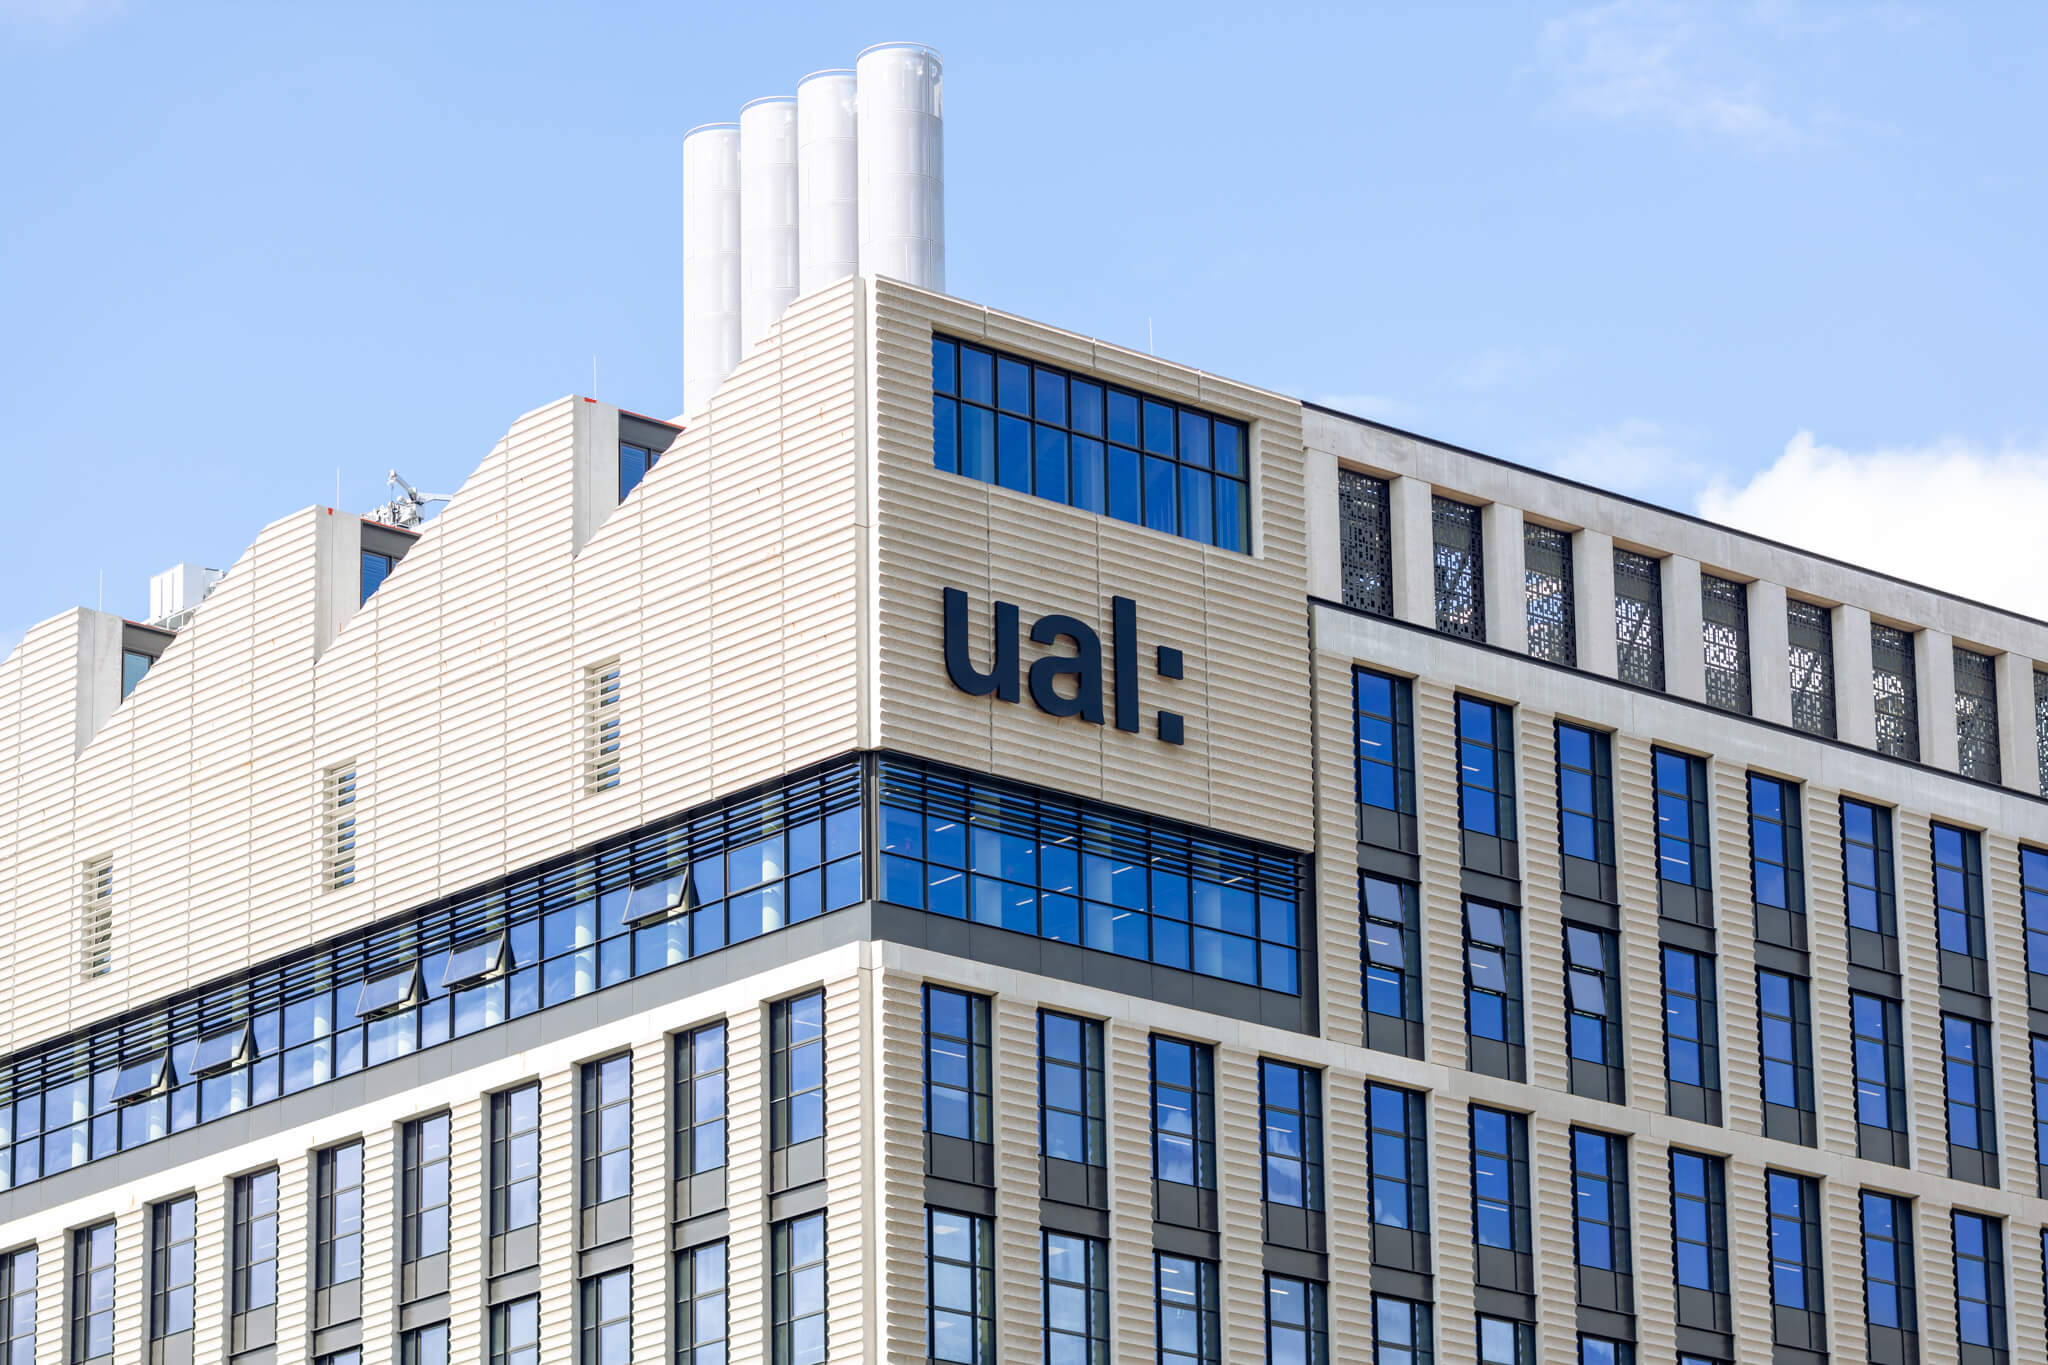 The UAL building